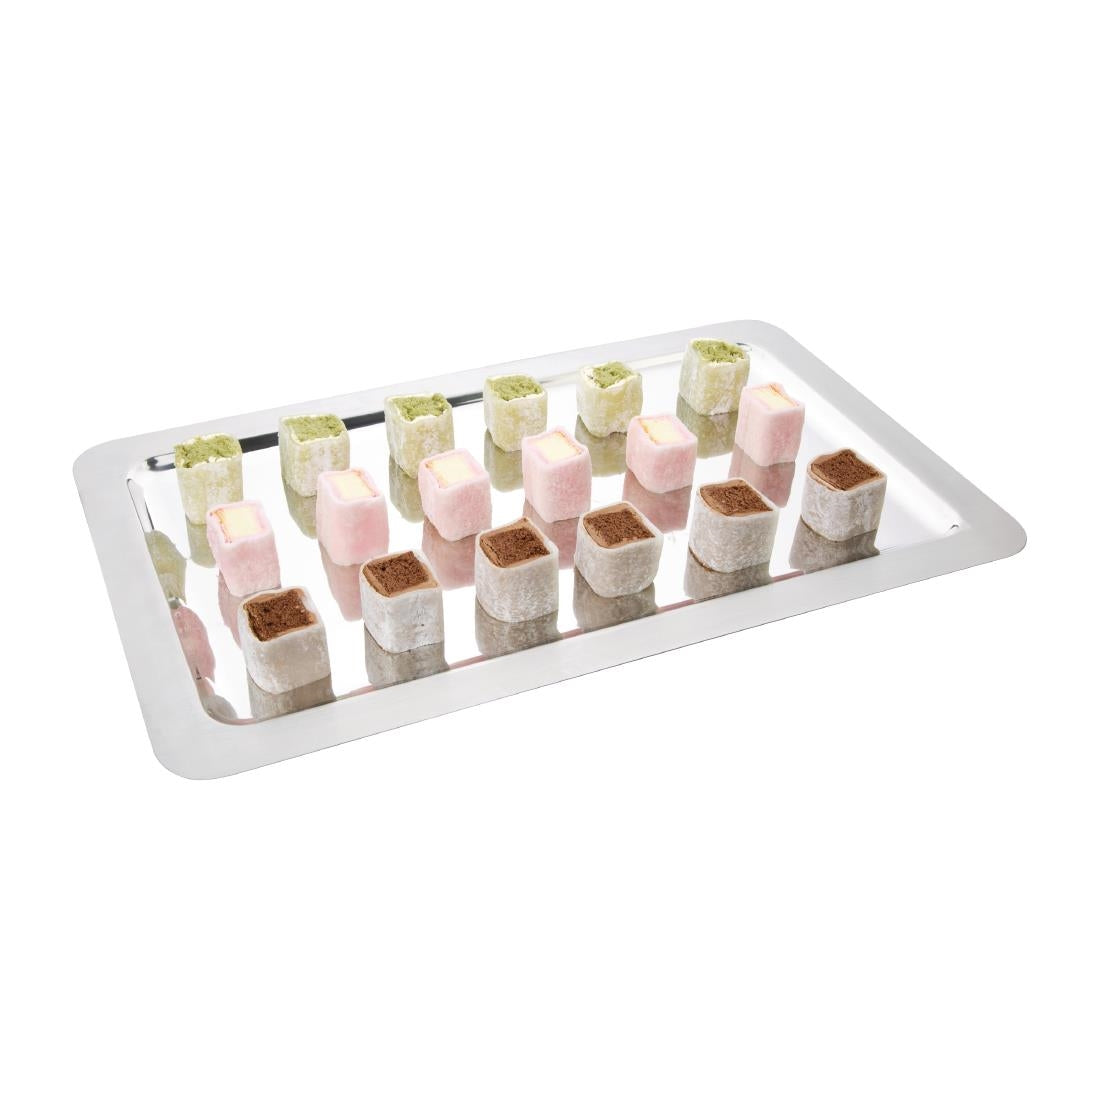 CN599 Olympia Stainless Steel Food Presentation Tray GN 1/1 JD Catering Equipment Solutions Ltd